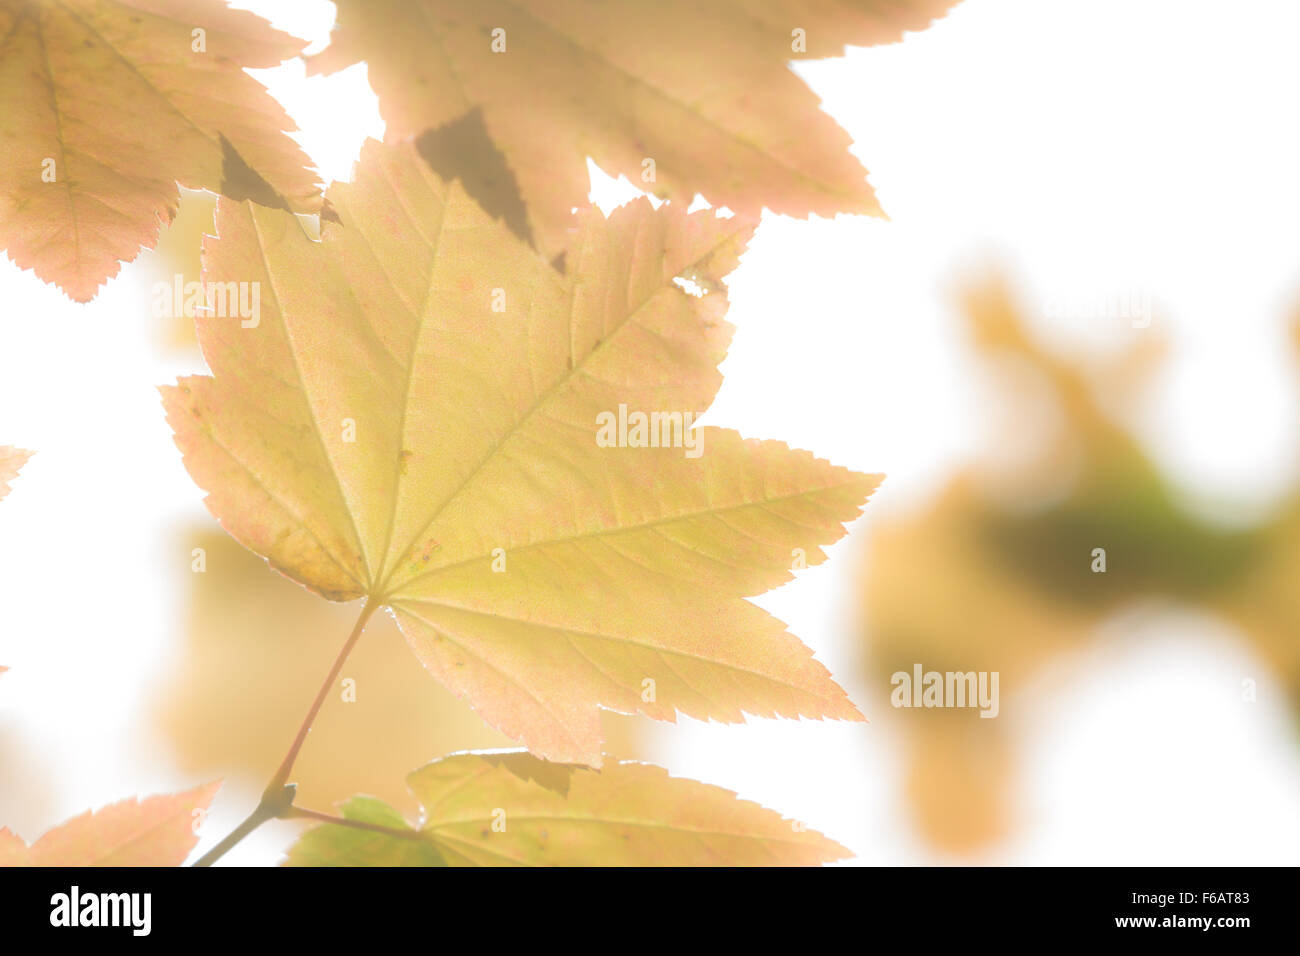 maple leaf with a golden glow with a soft effect made by bright sun light behind it Stock Photo